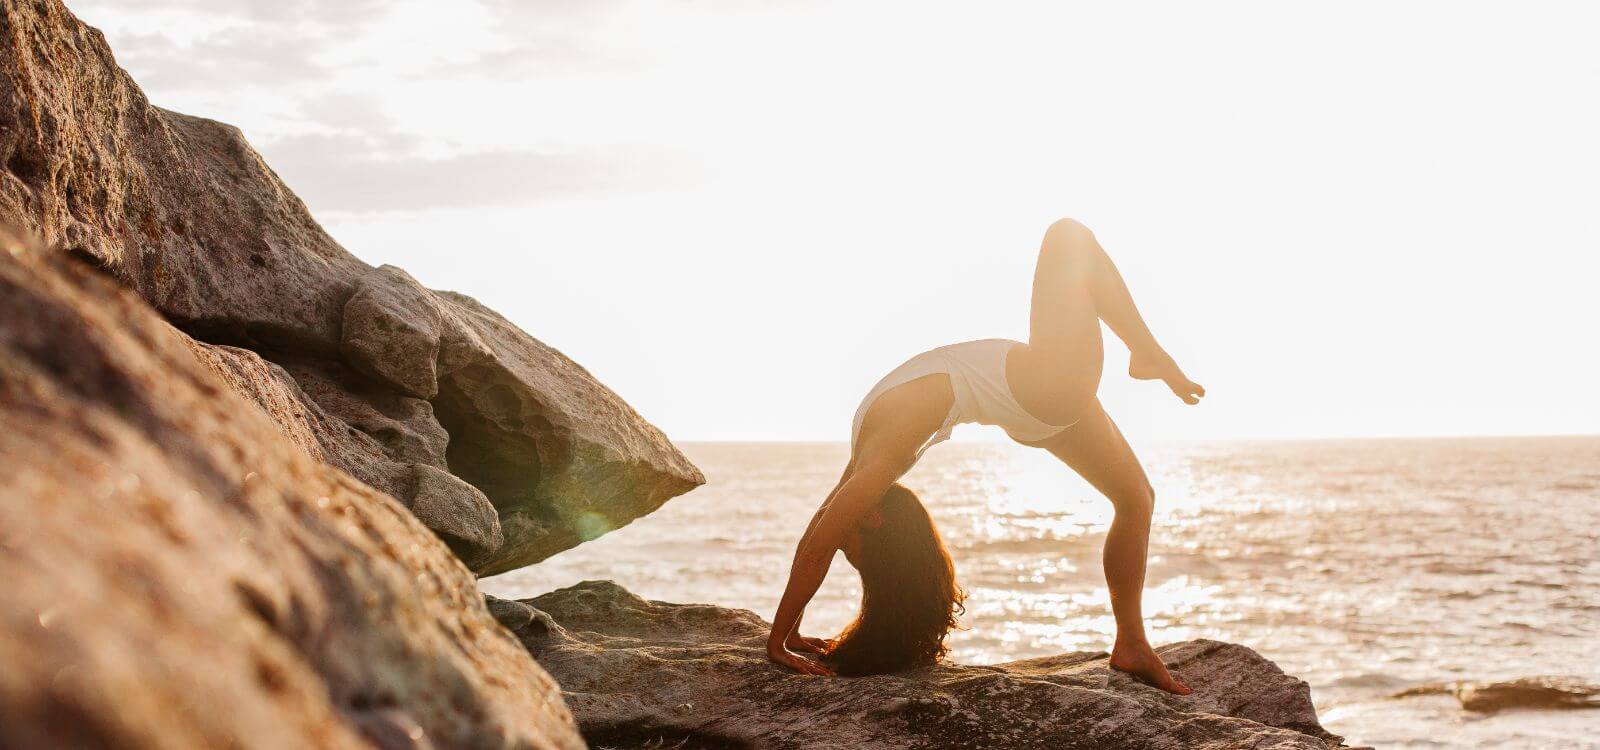 A Yoga Sequence to Open Your Heart